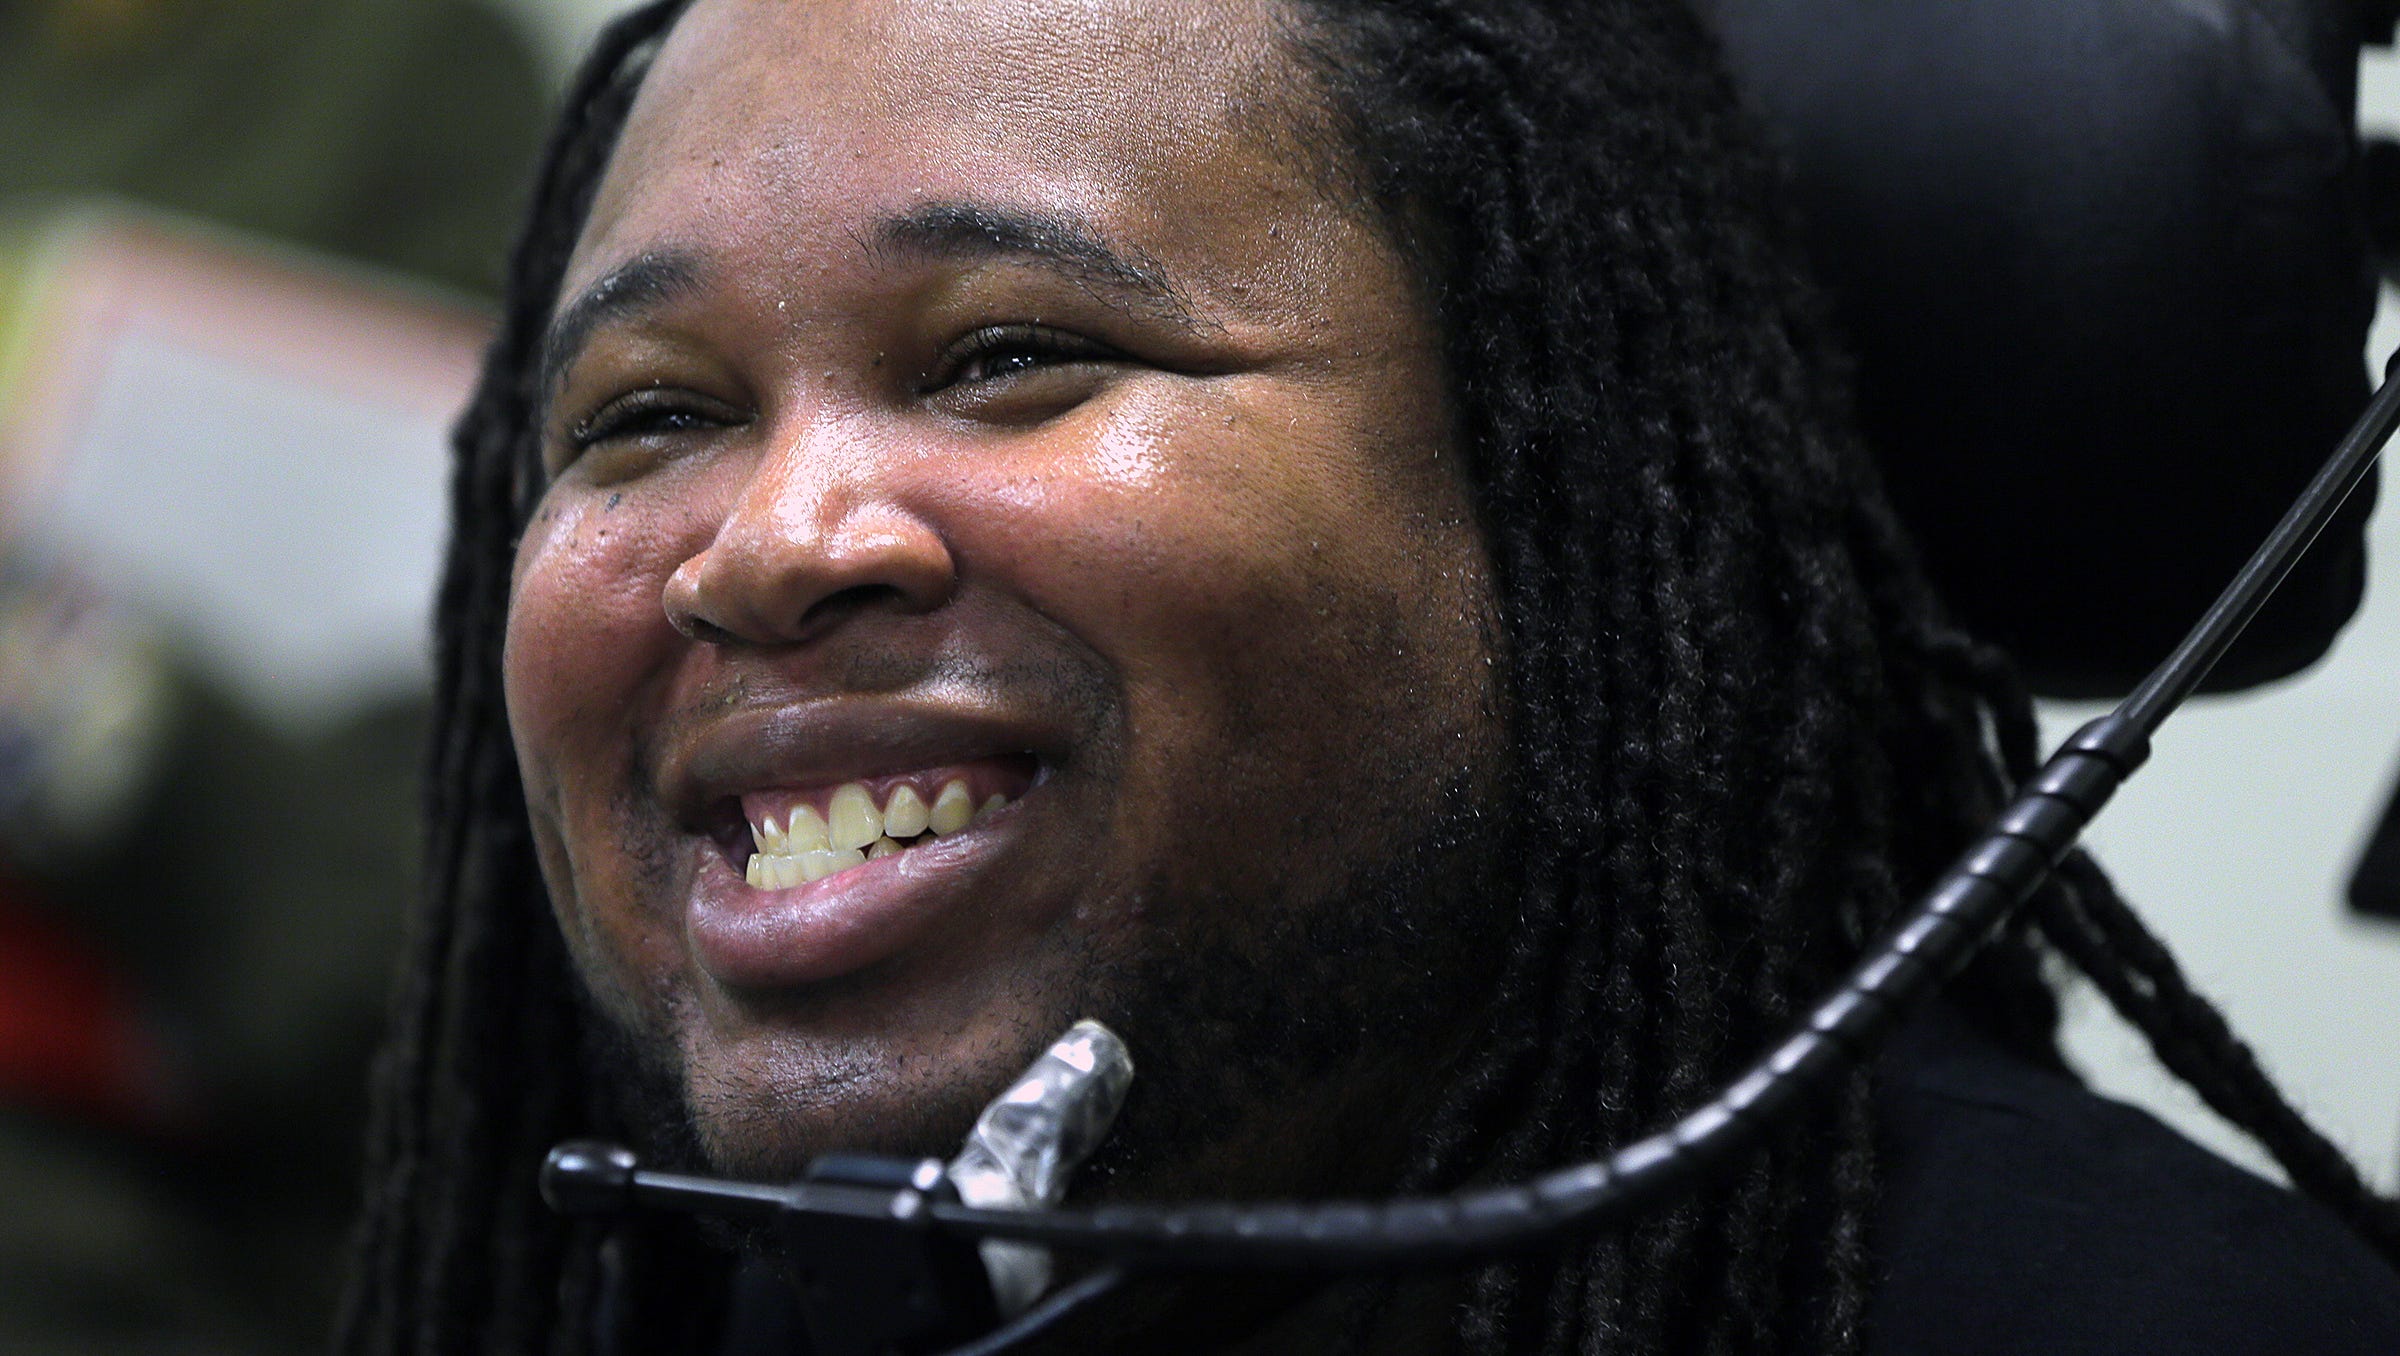 believe by eric legrand